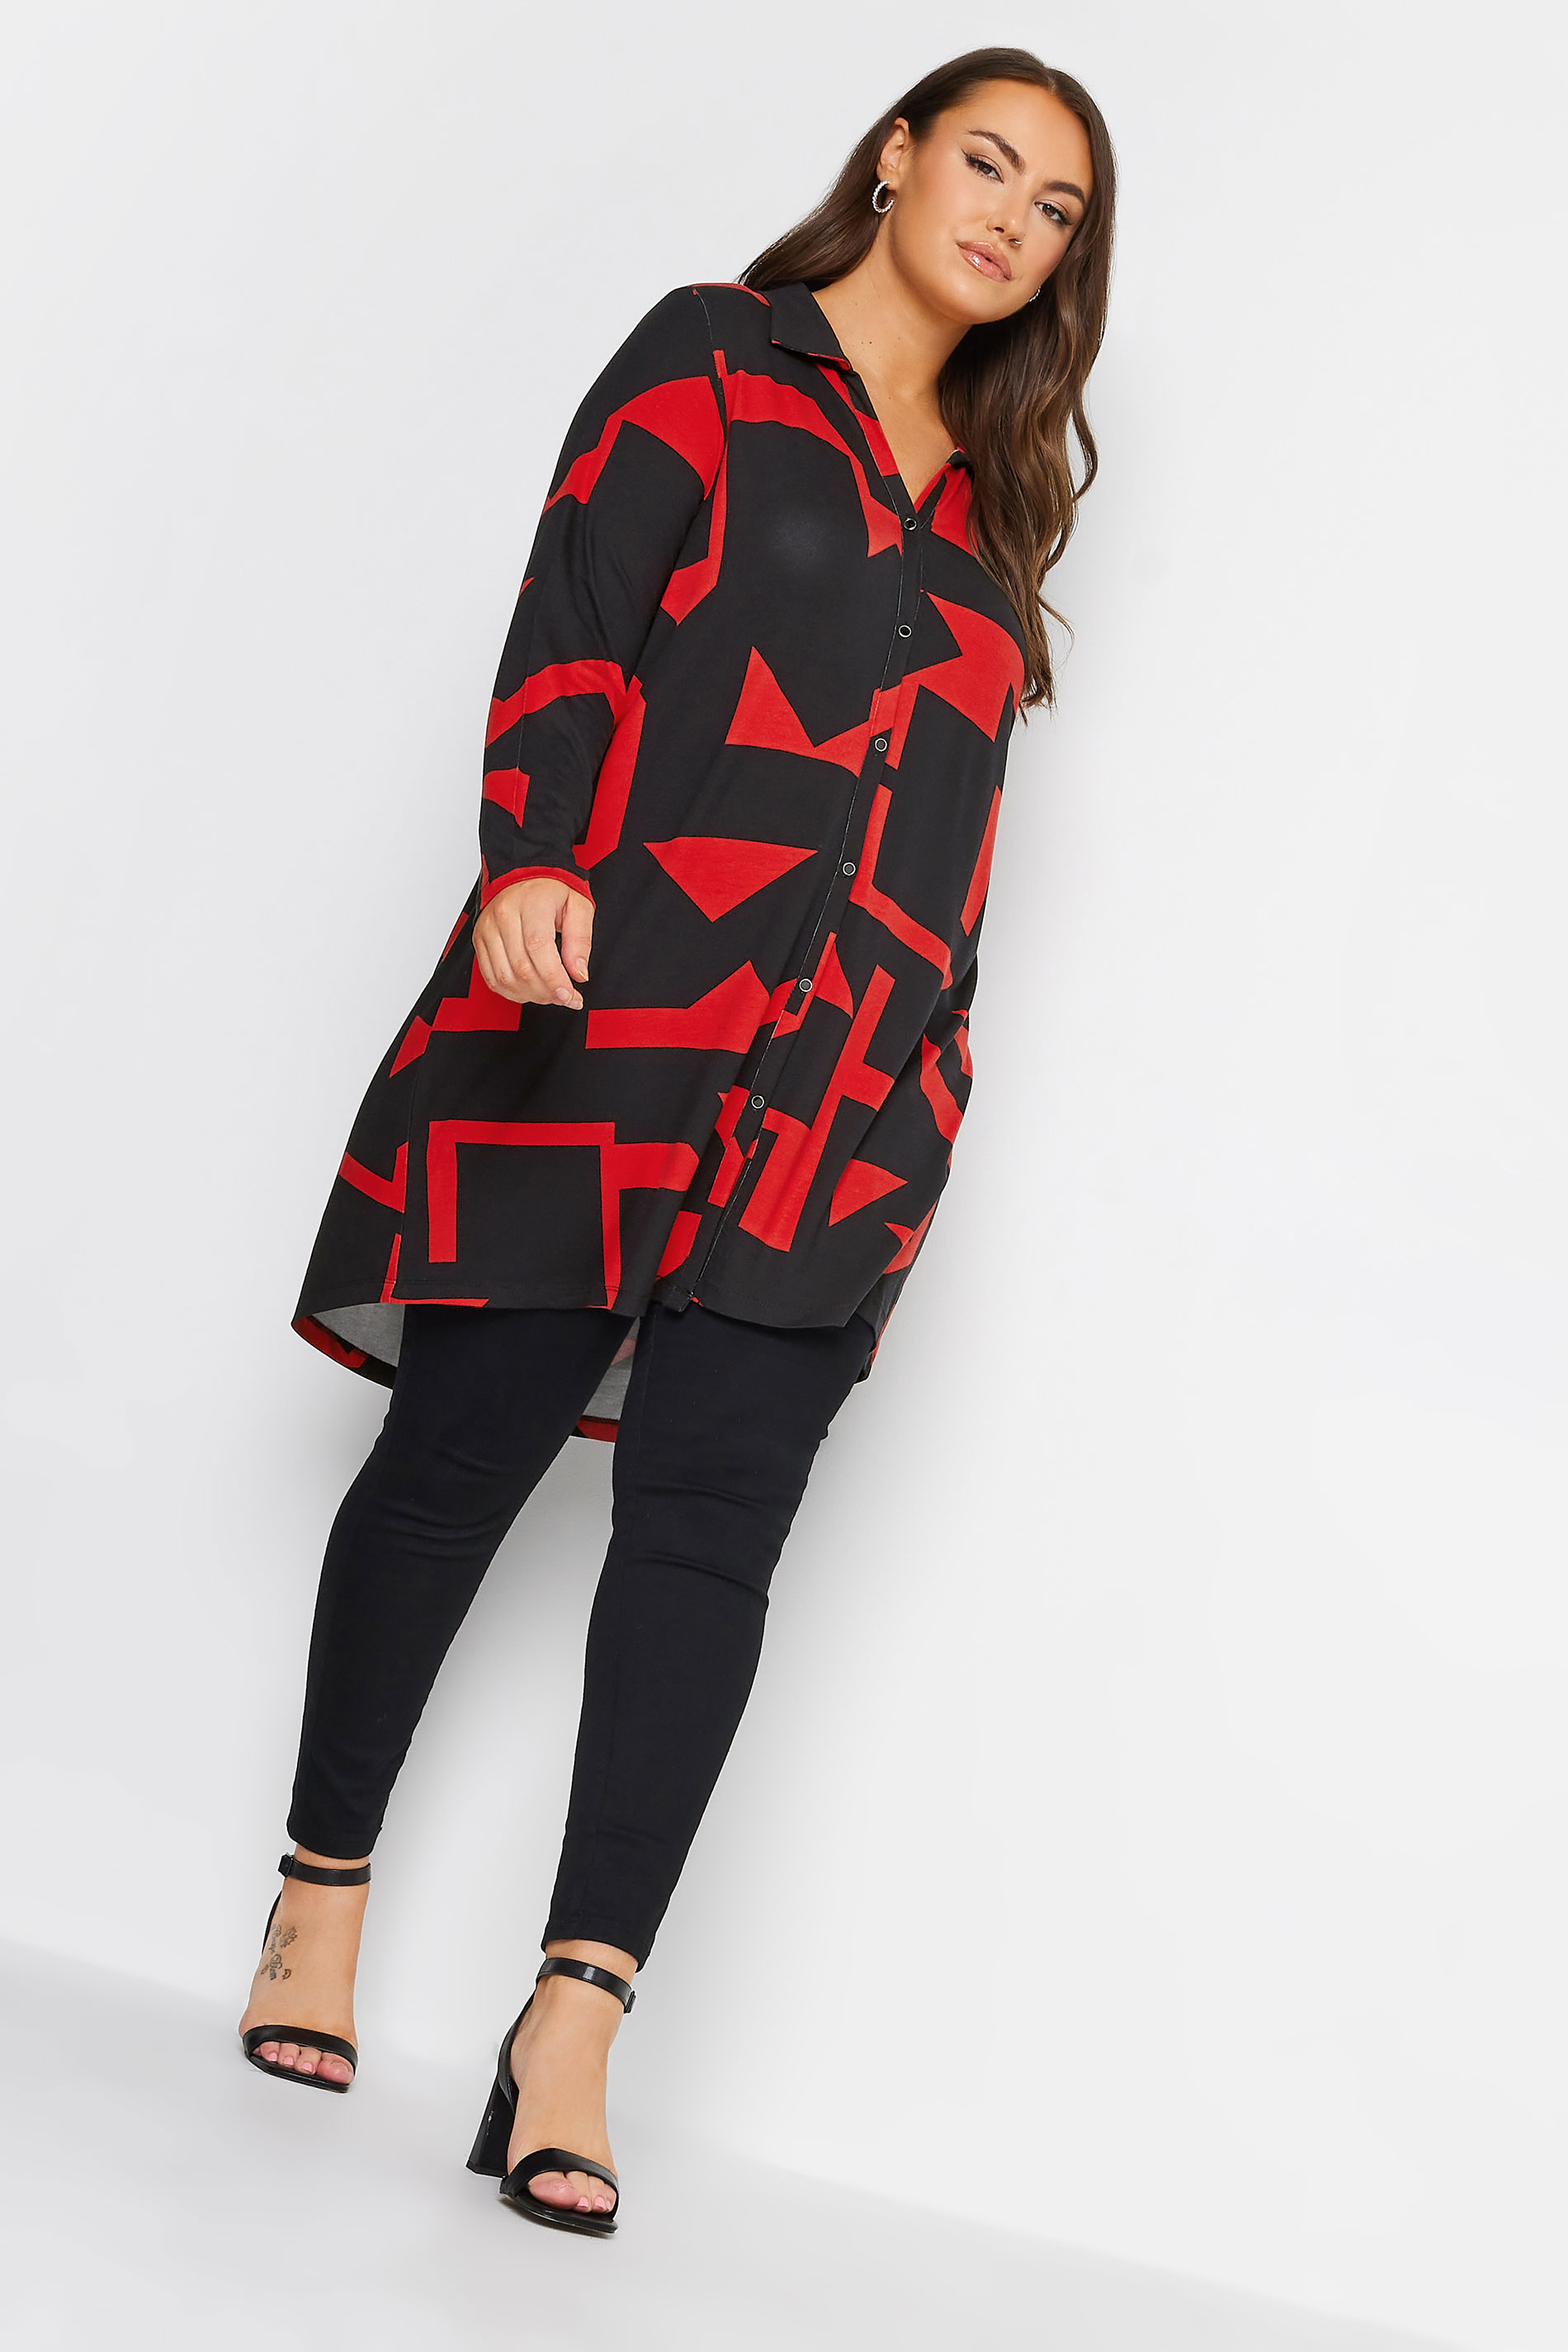 YOURS Curve Plus Size Black & Red Geometric Print Tunic Shirt | Yours Clothing  3